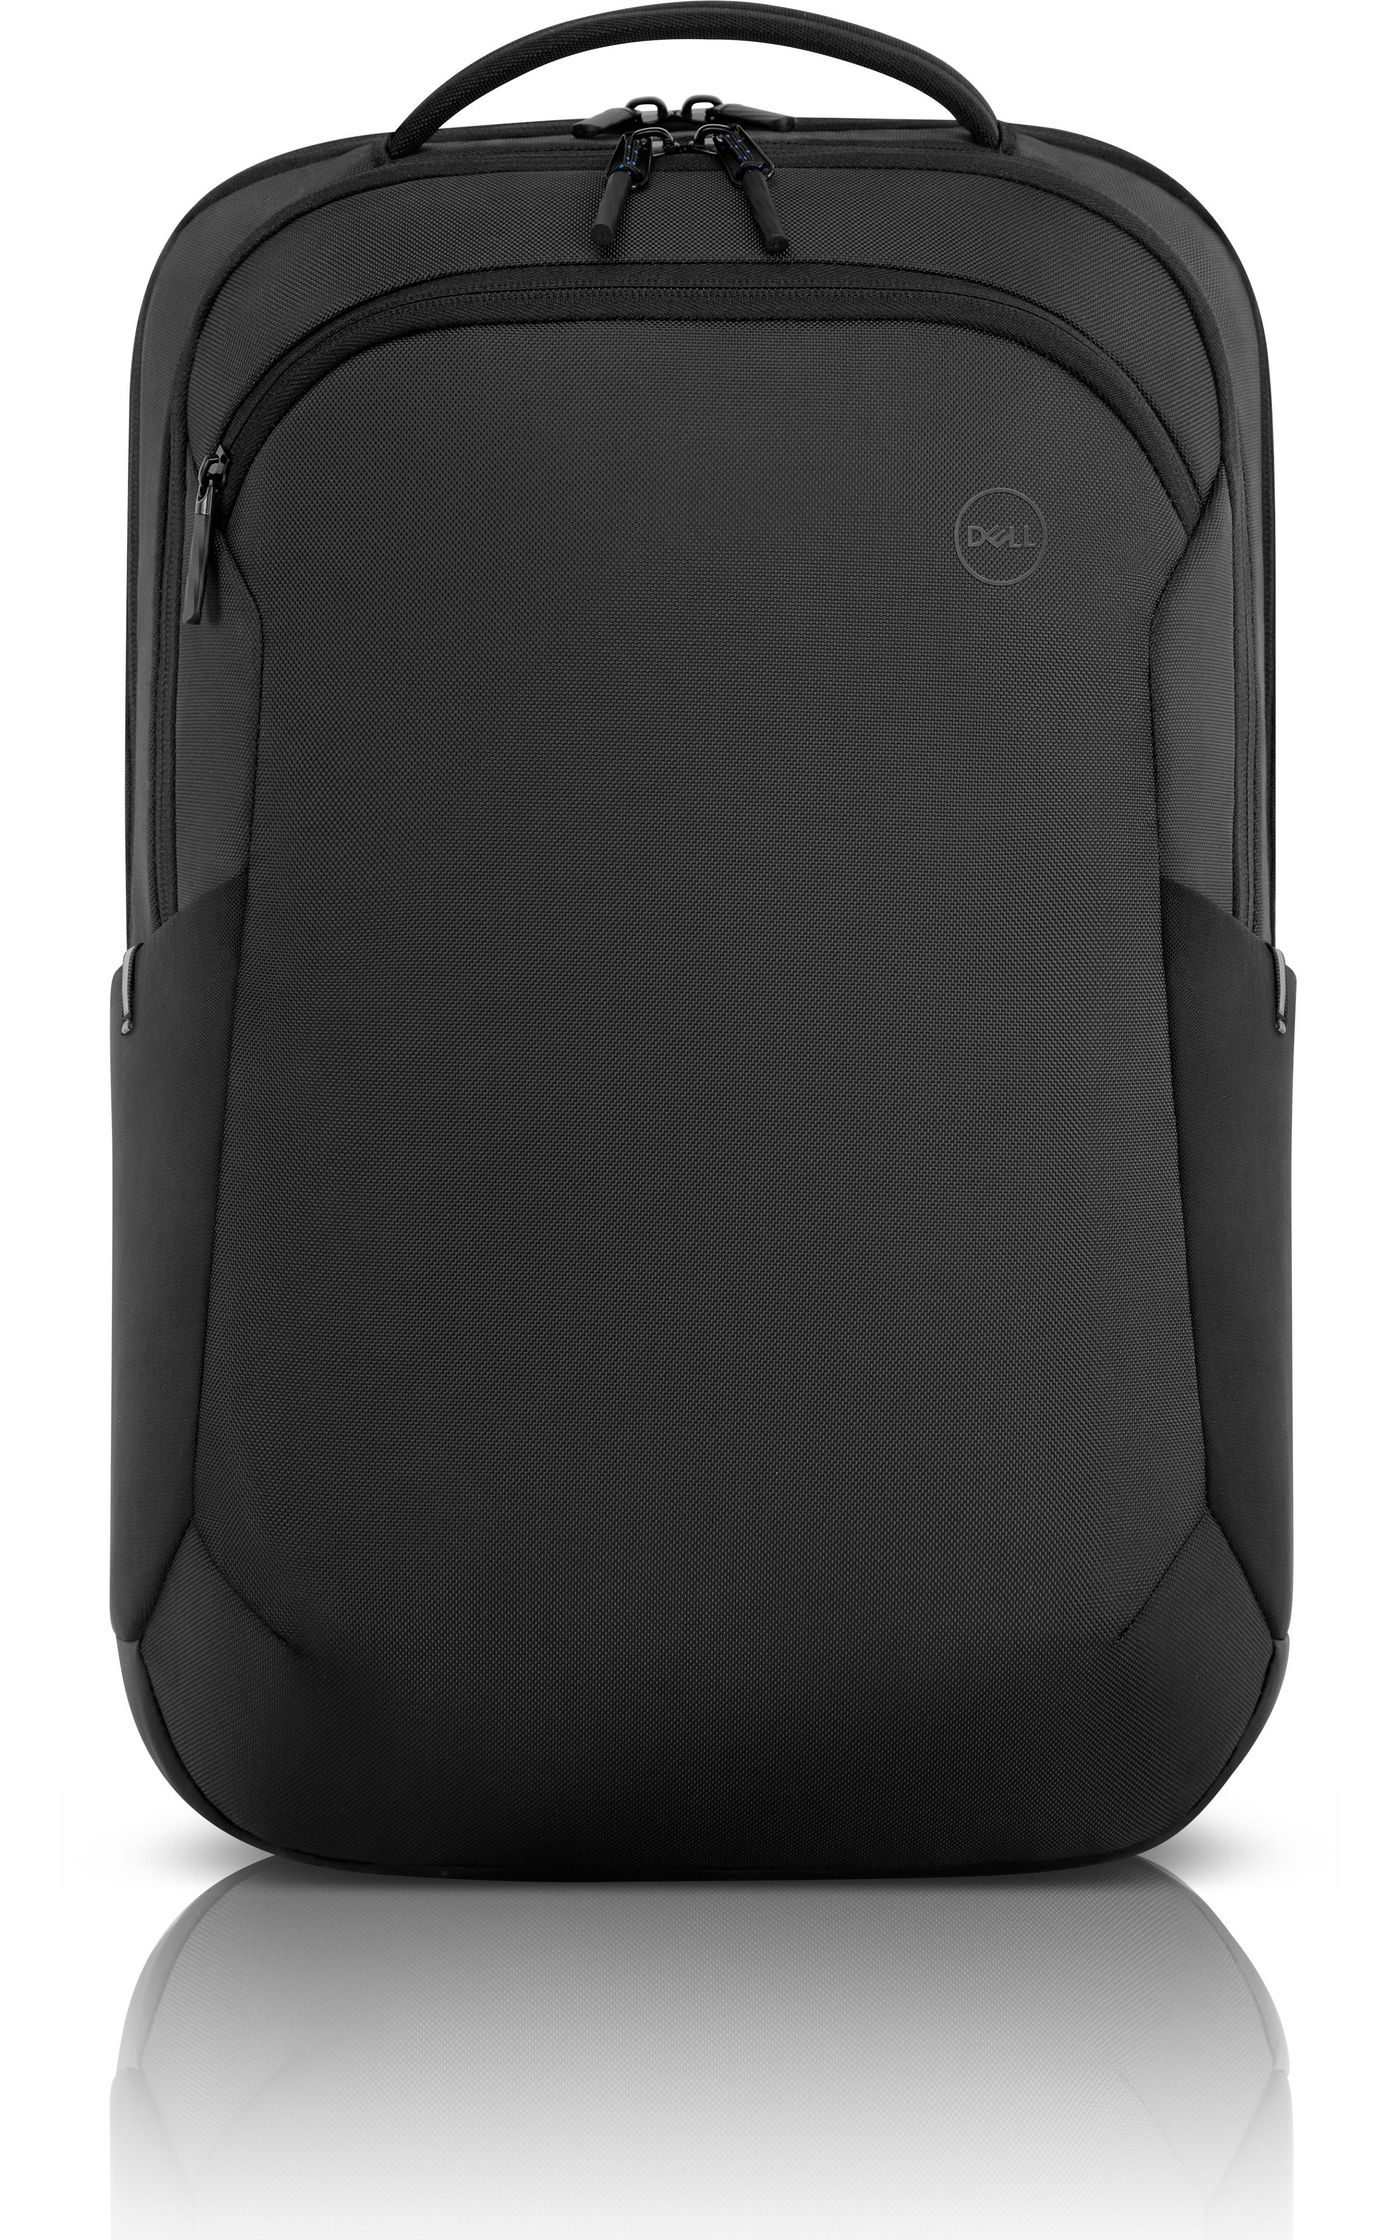 Ecoloop Pro Backpack 15